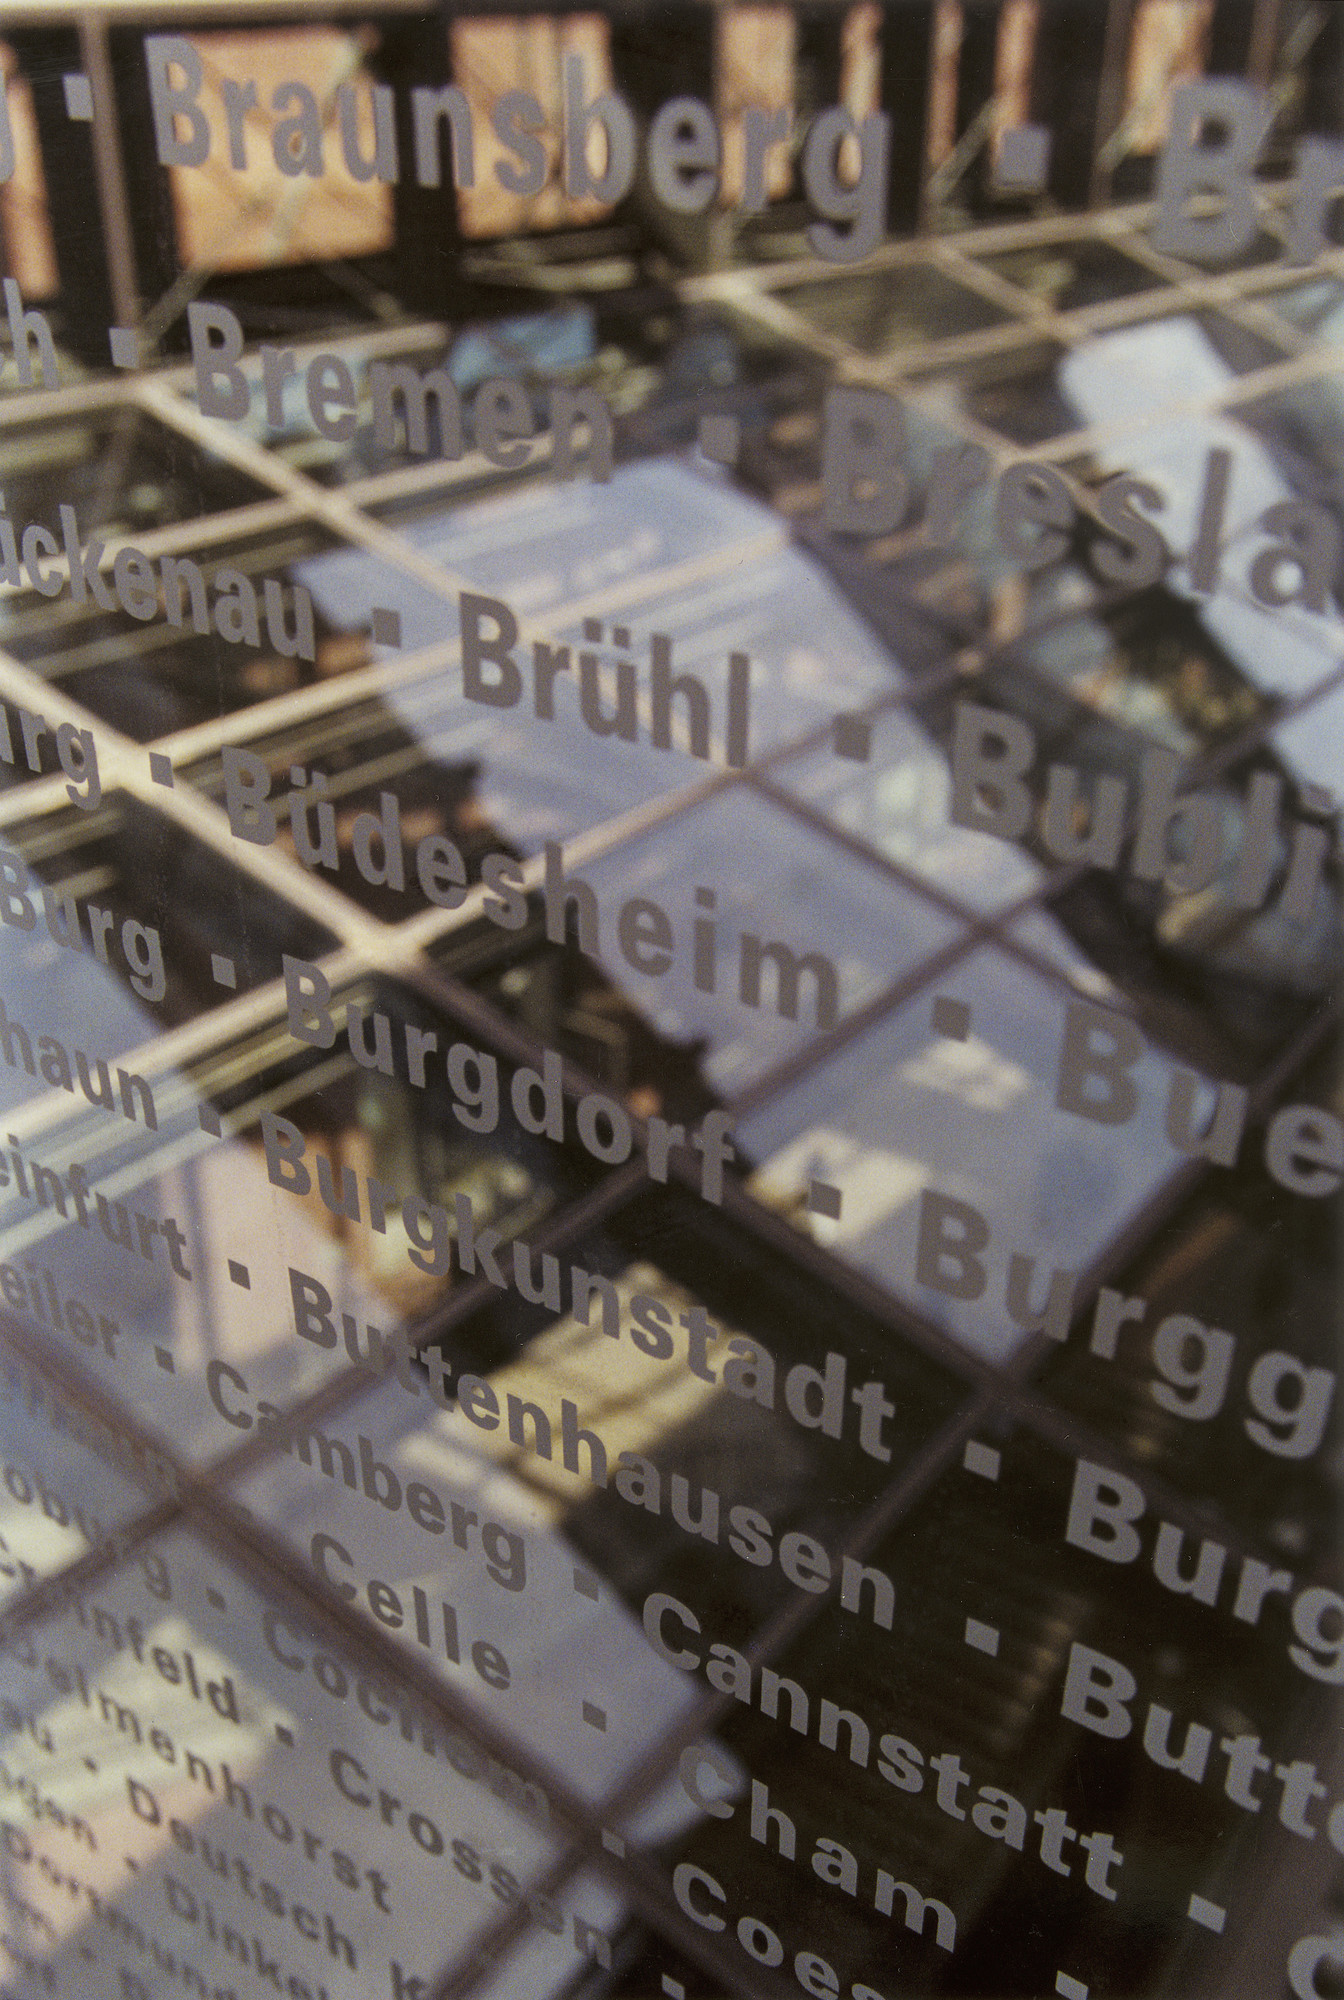 Interior of one of the glass bridges in the permanent exhibition of the U.S. Holocaust Memorial Museum, etched with the names of communities that were destroyed during the Holocaust.